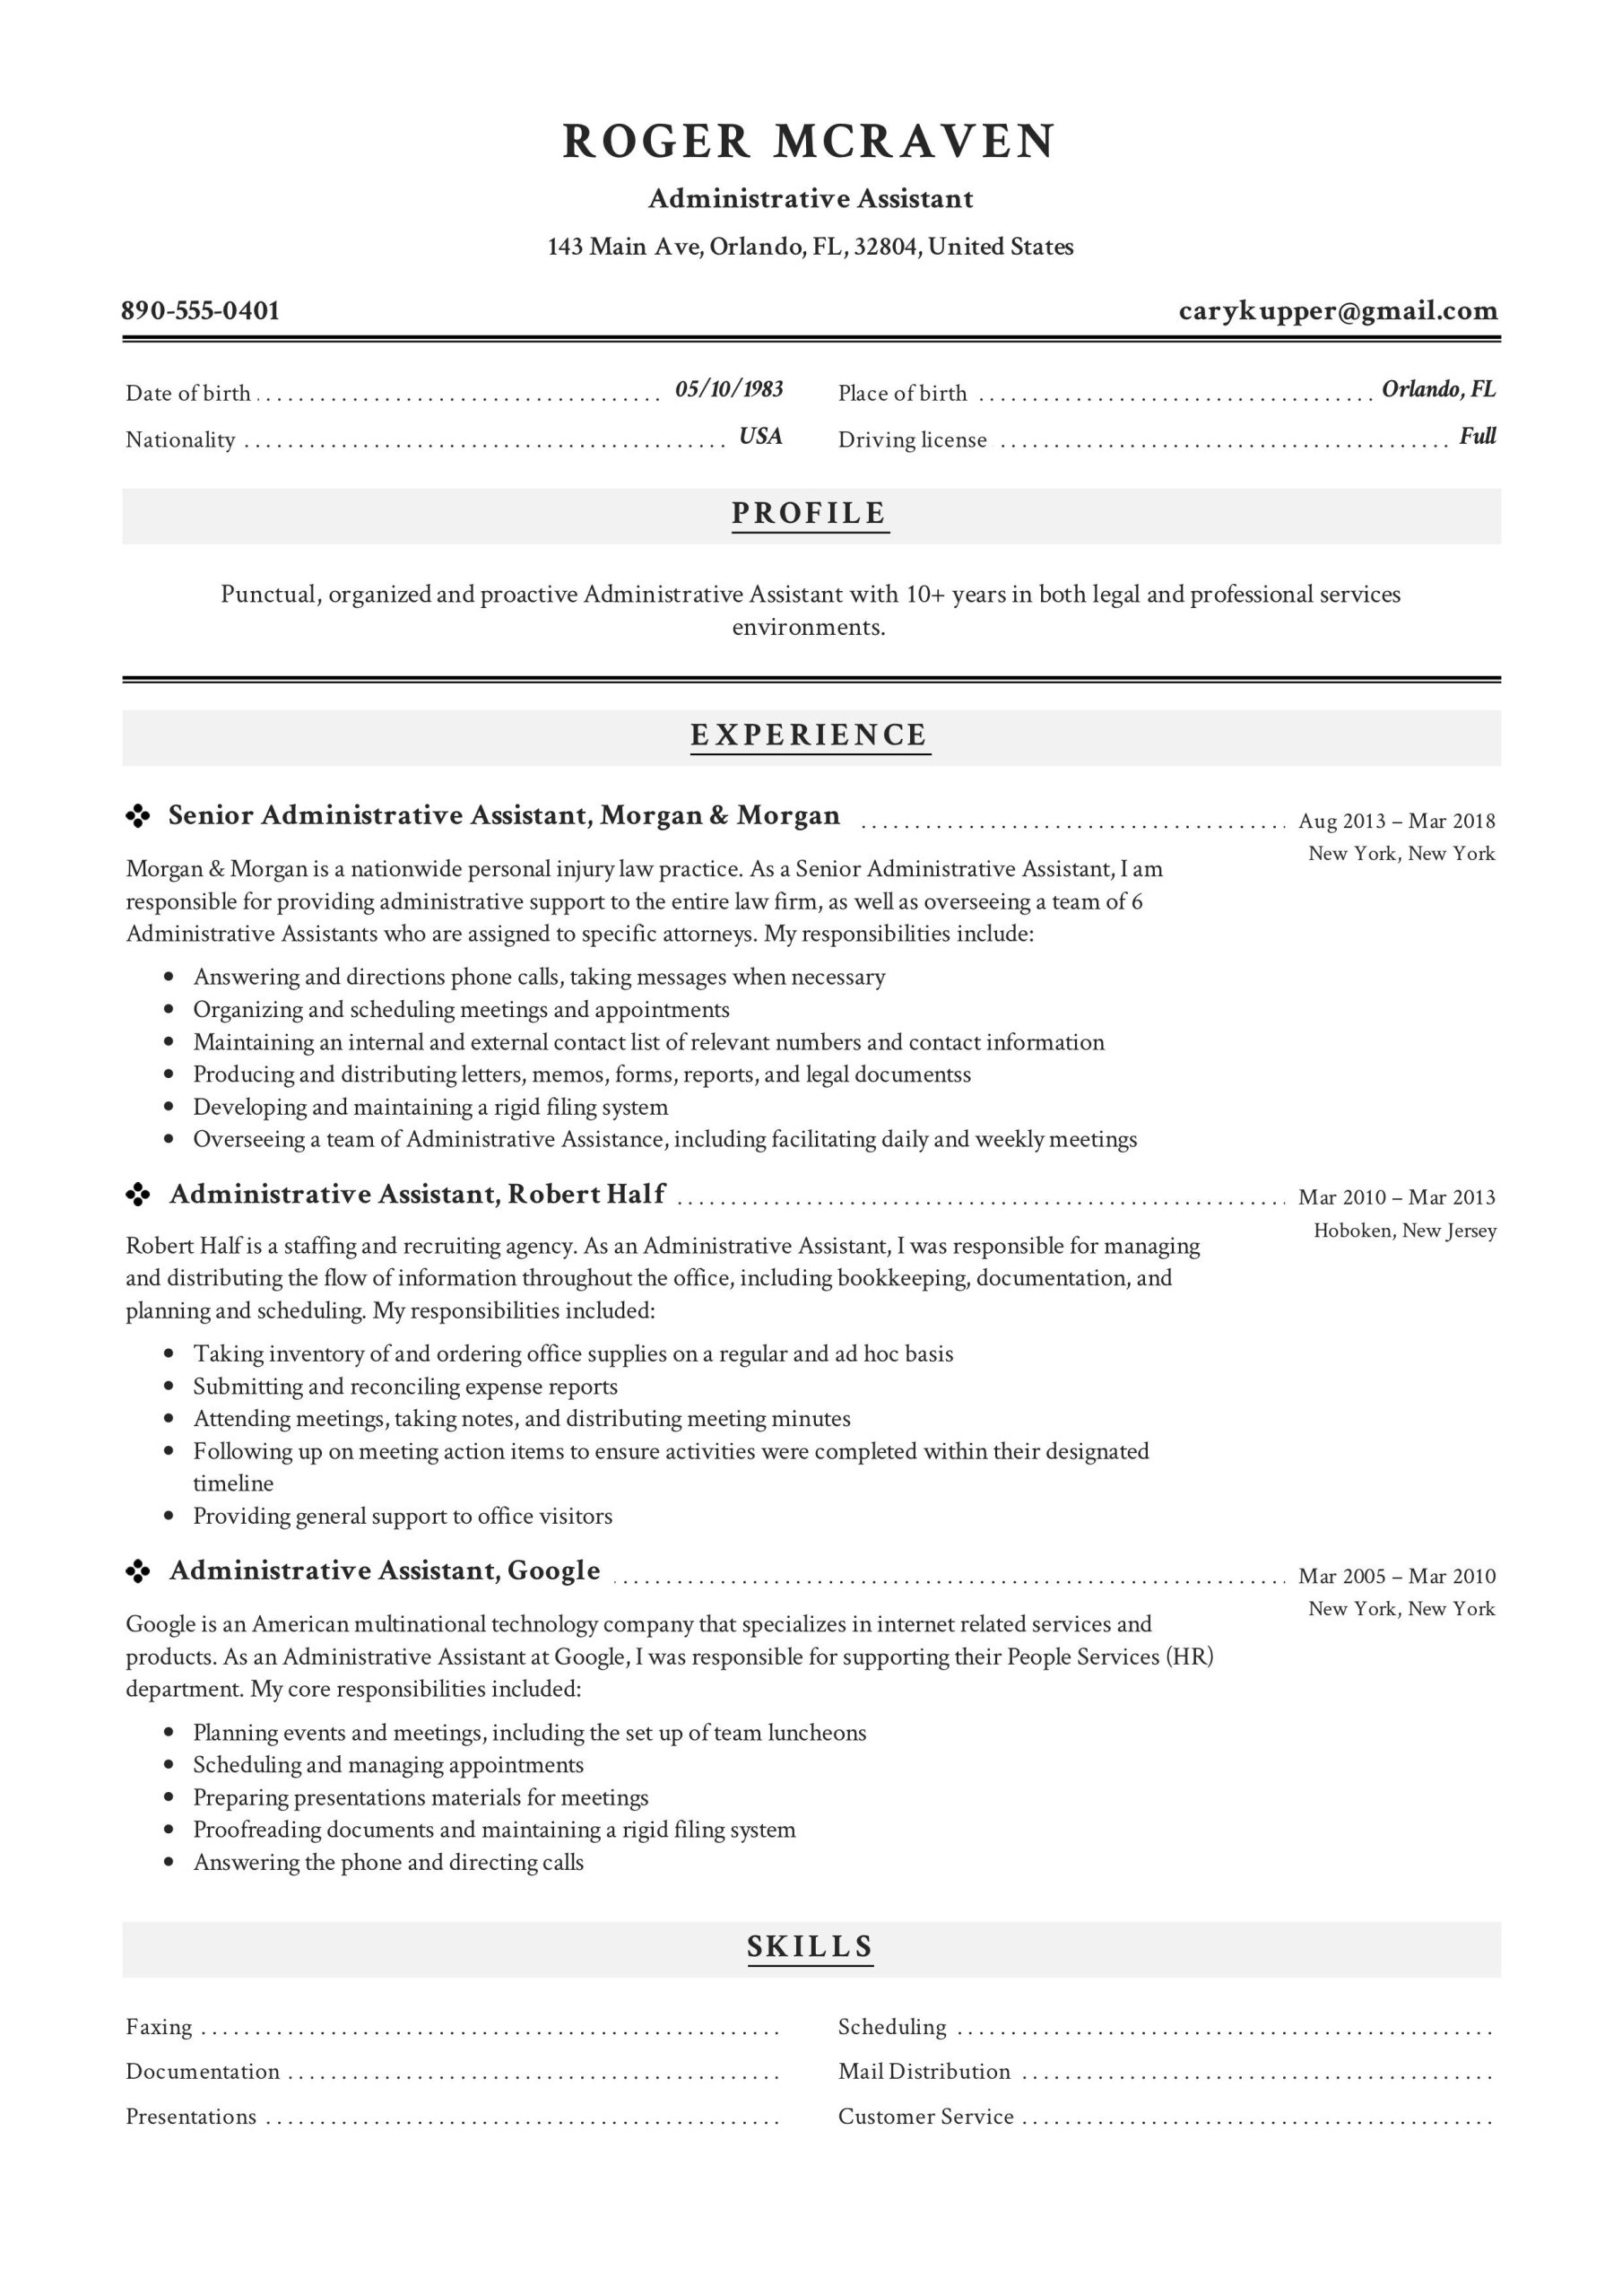 Administrative Assistant Resume Examples 2018